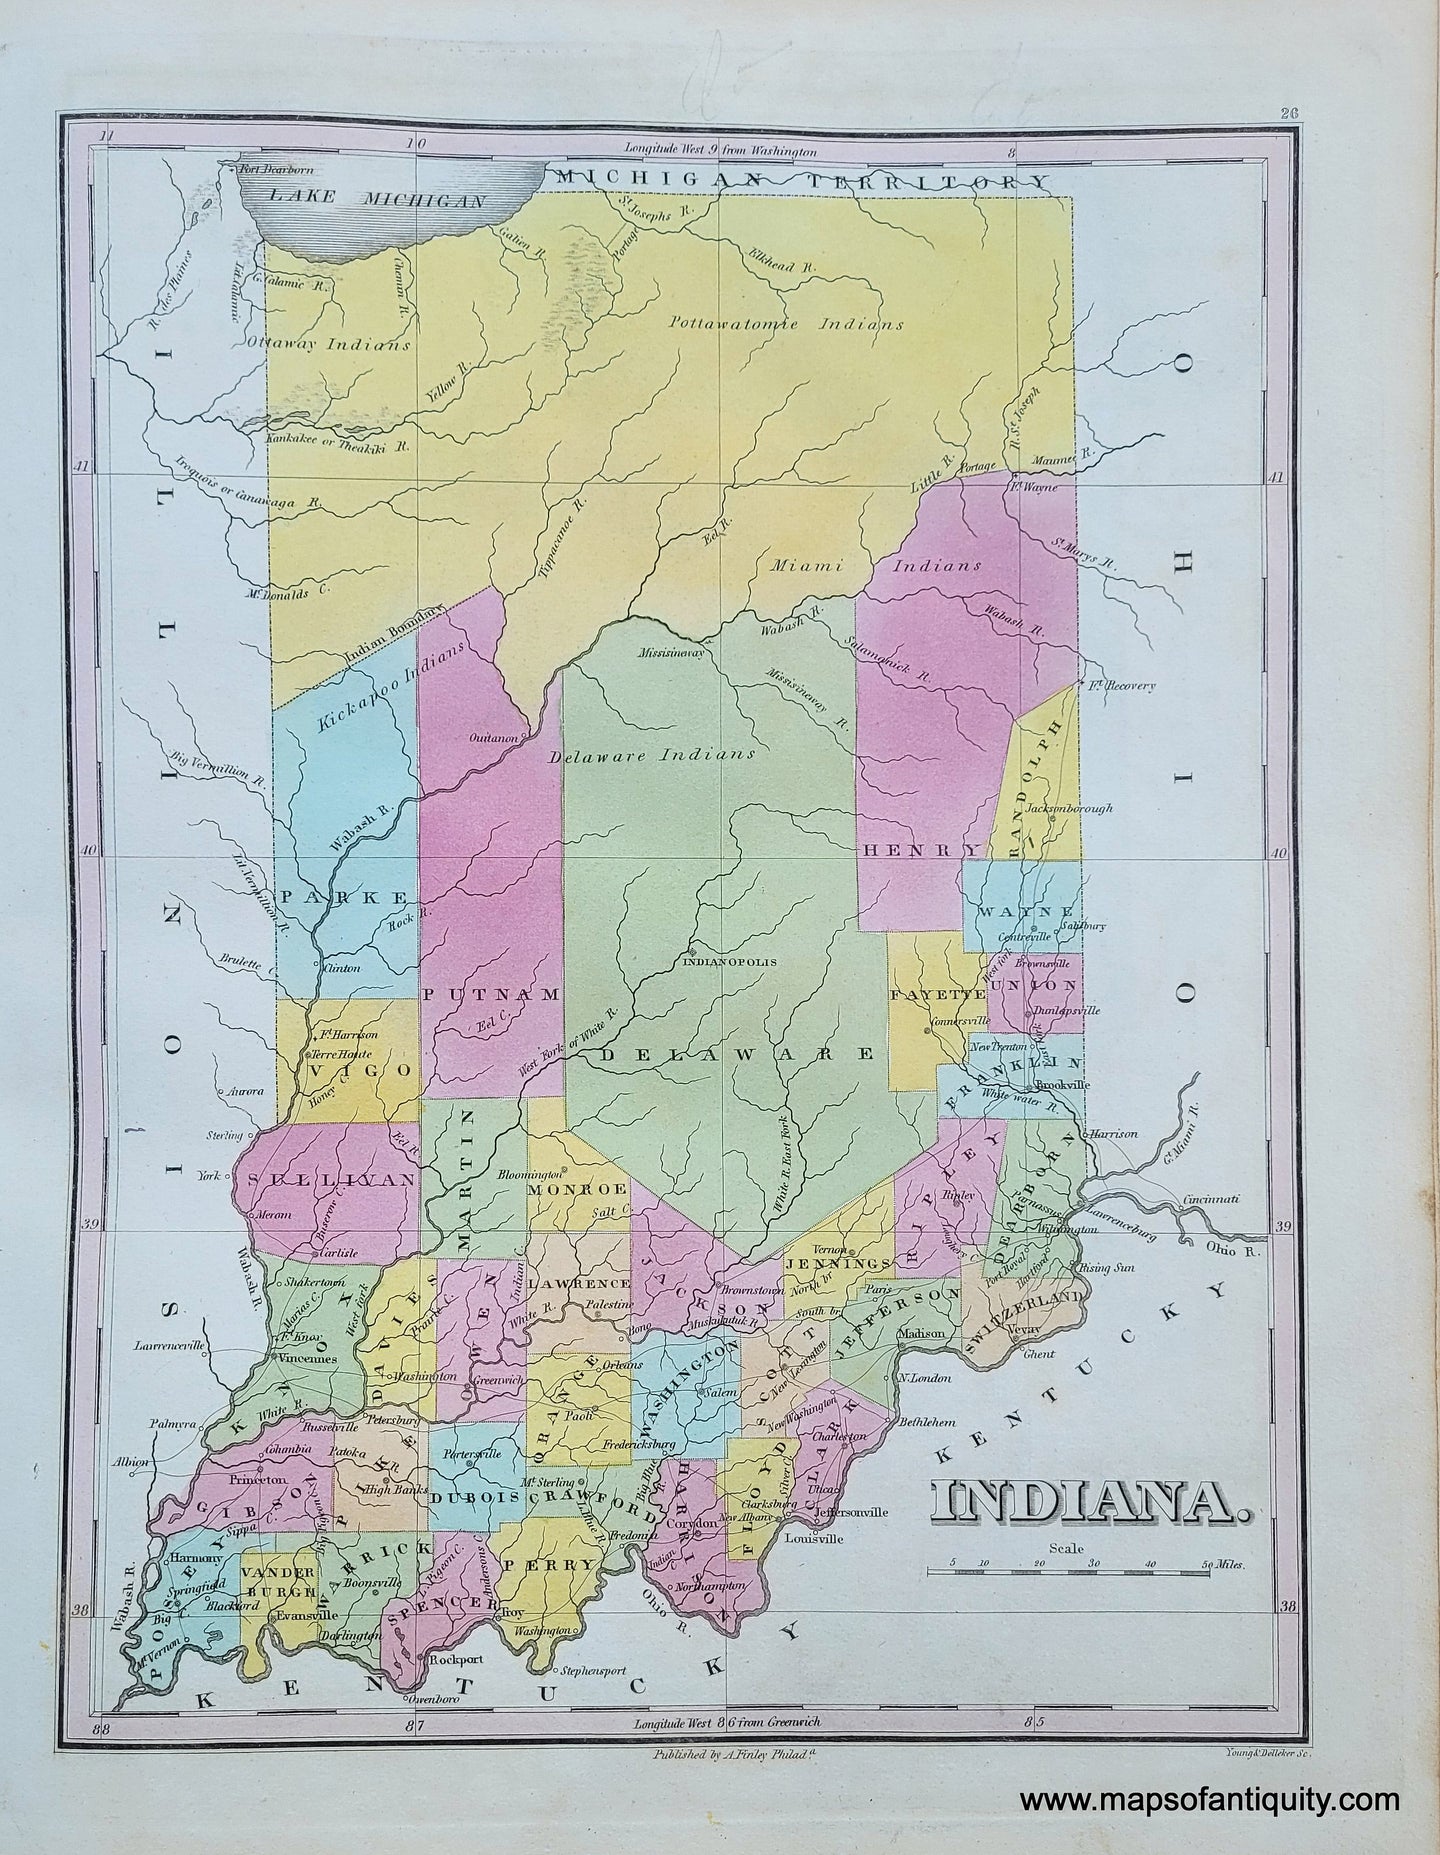 Antique-Hand-Colored-Map-Indiana.-**********-United-States-Midwest-1824-Anthony-Finley-Maps-Of-Antiquity